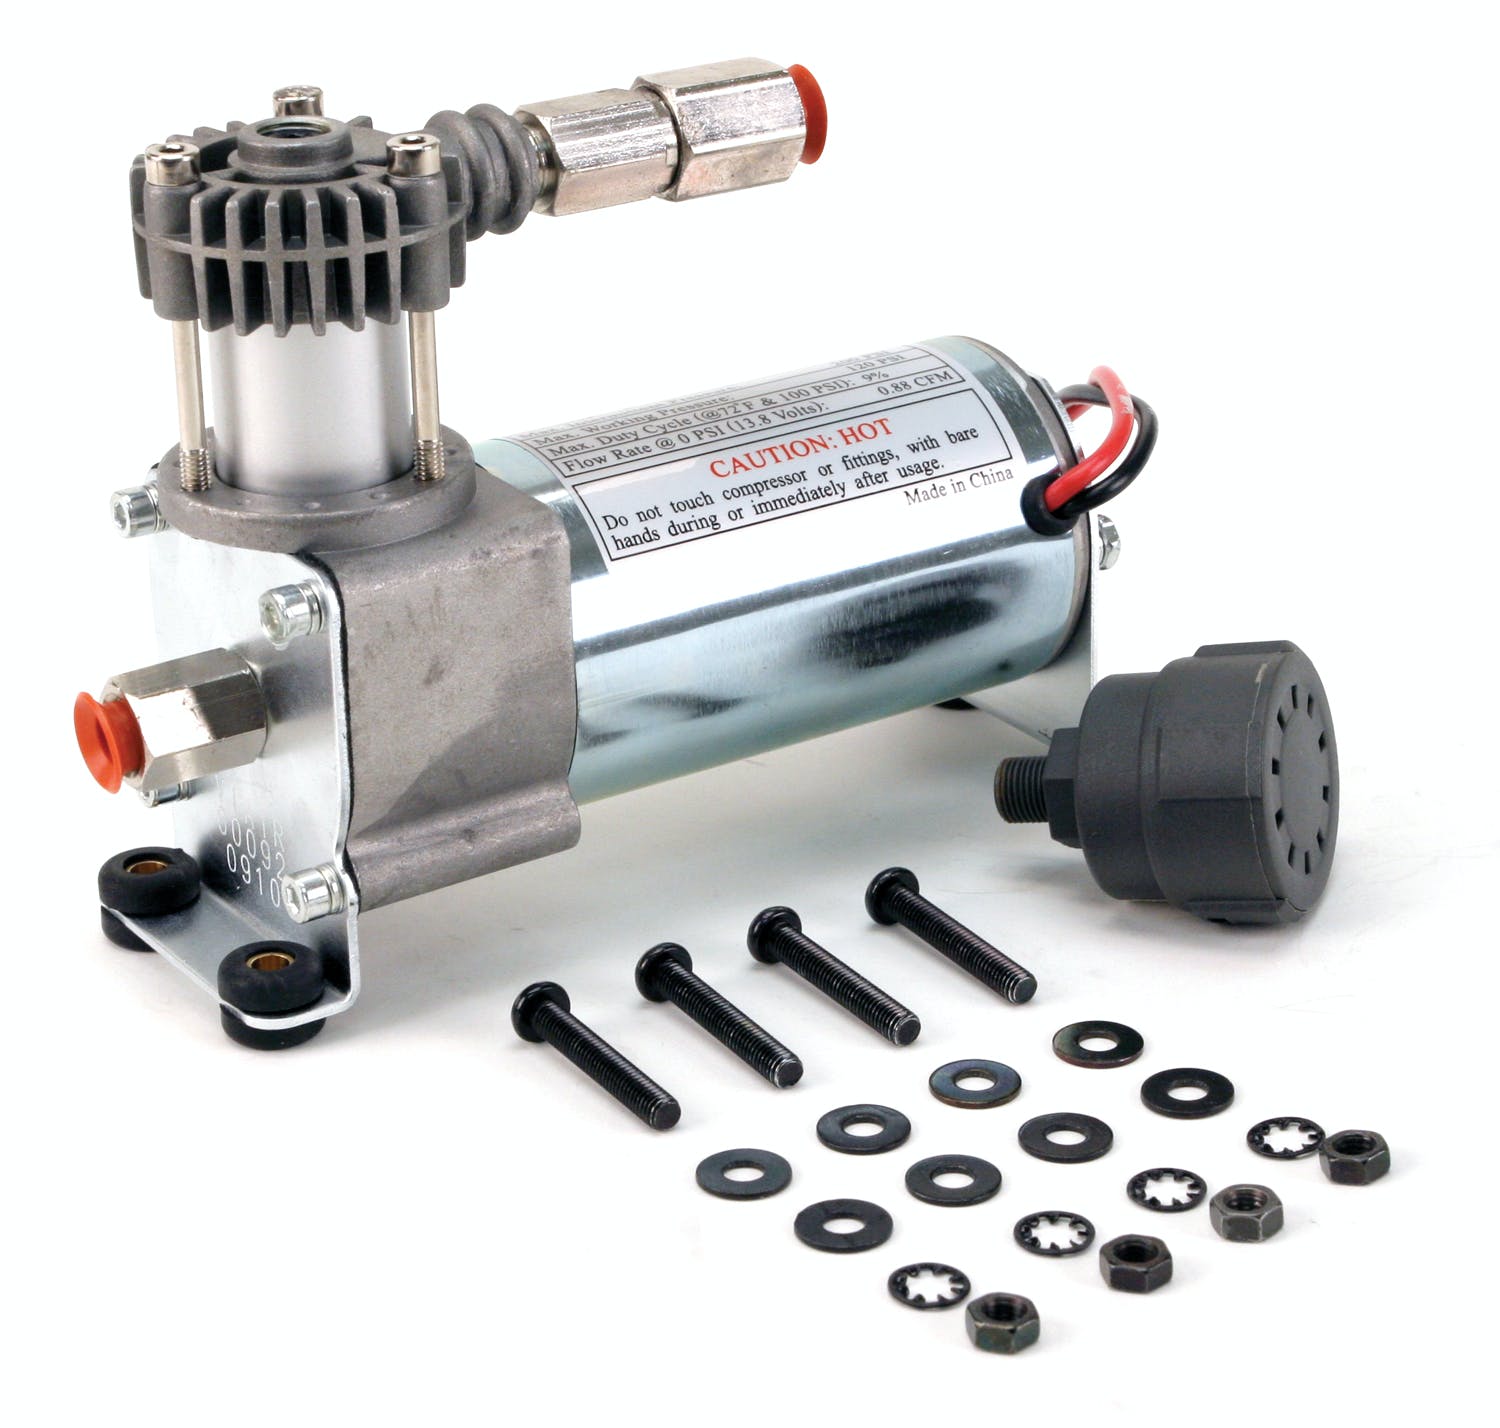 VIAIR 00092 92C Compressor Kit with External Check Valve and Intake Filter 9% Duty Seale